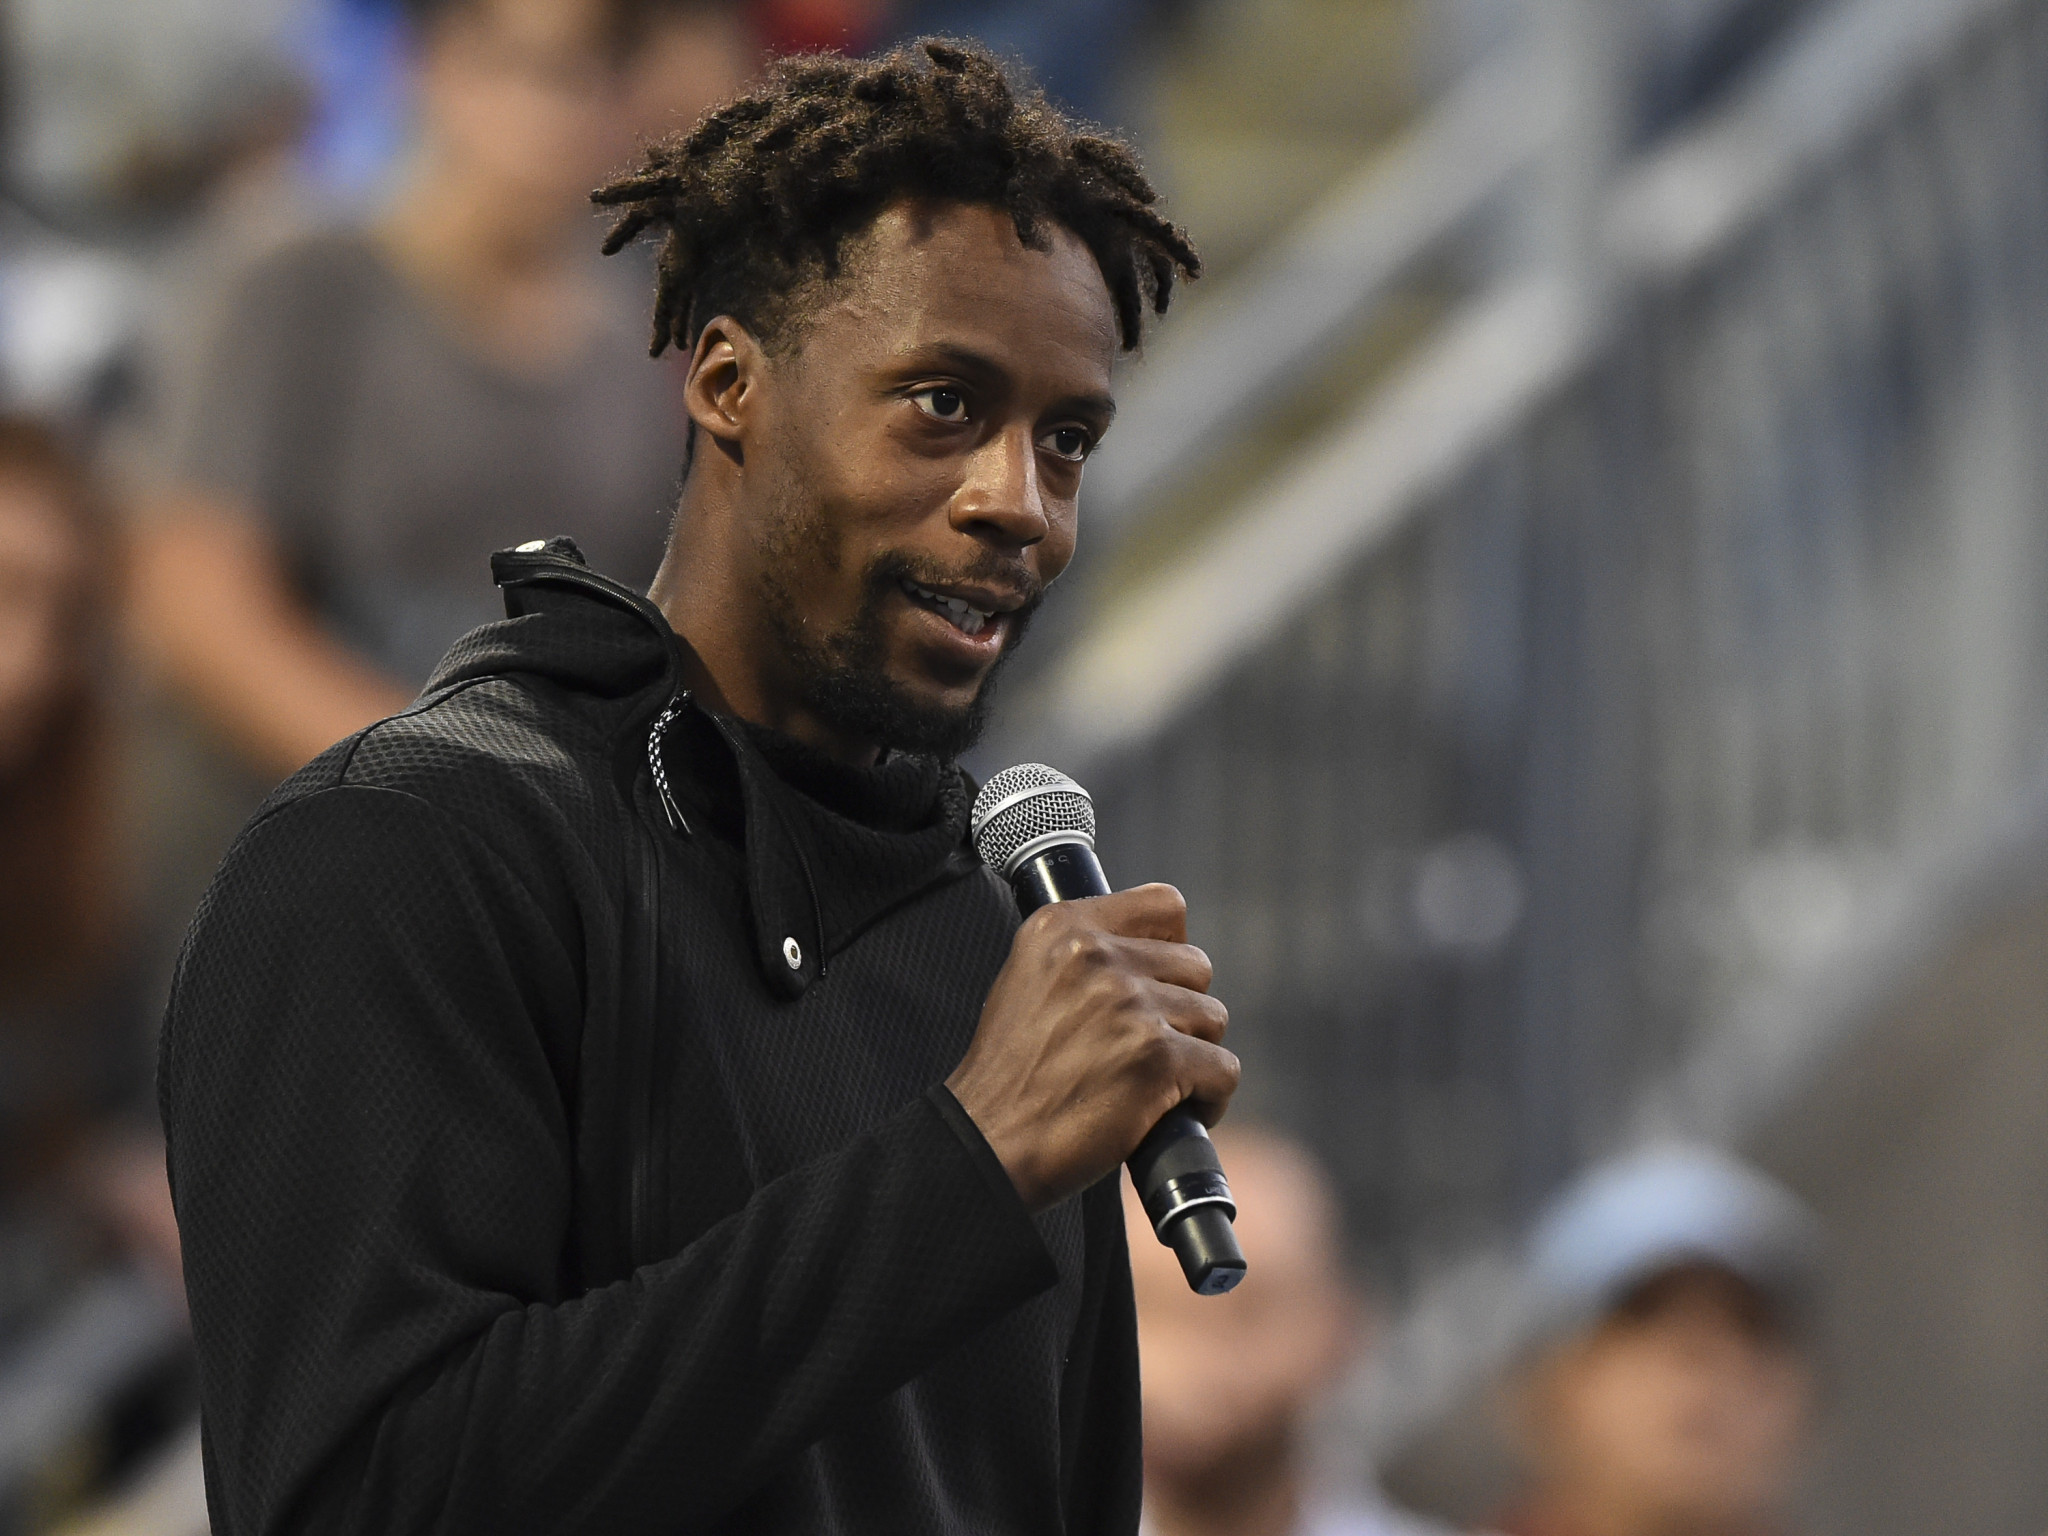 Gaël Monfils of France addresses the spectators after withdrawing from his Rogers Cup match against Rafael Nadal of Spain ©Getty Images